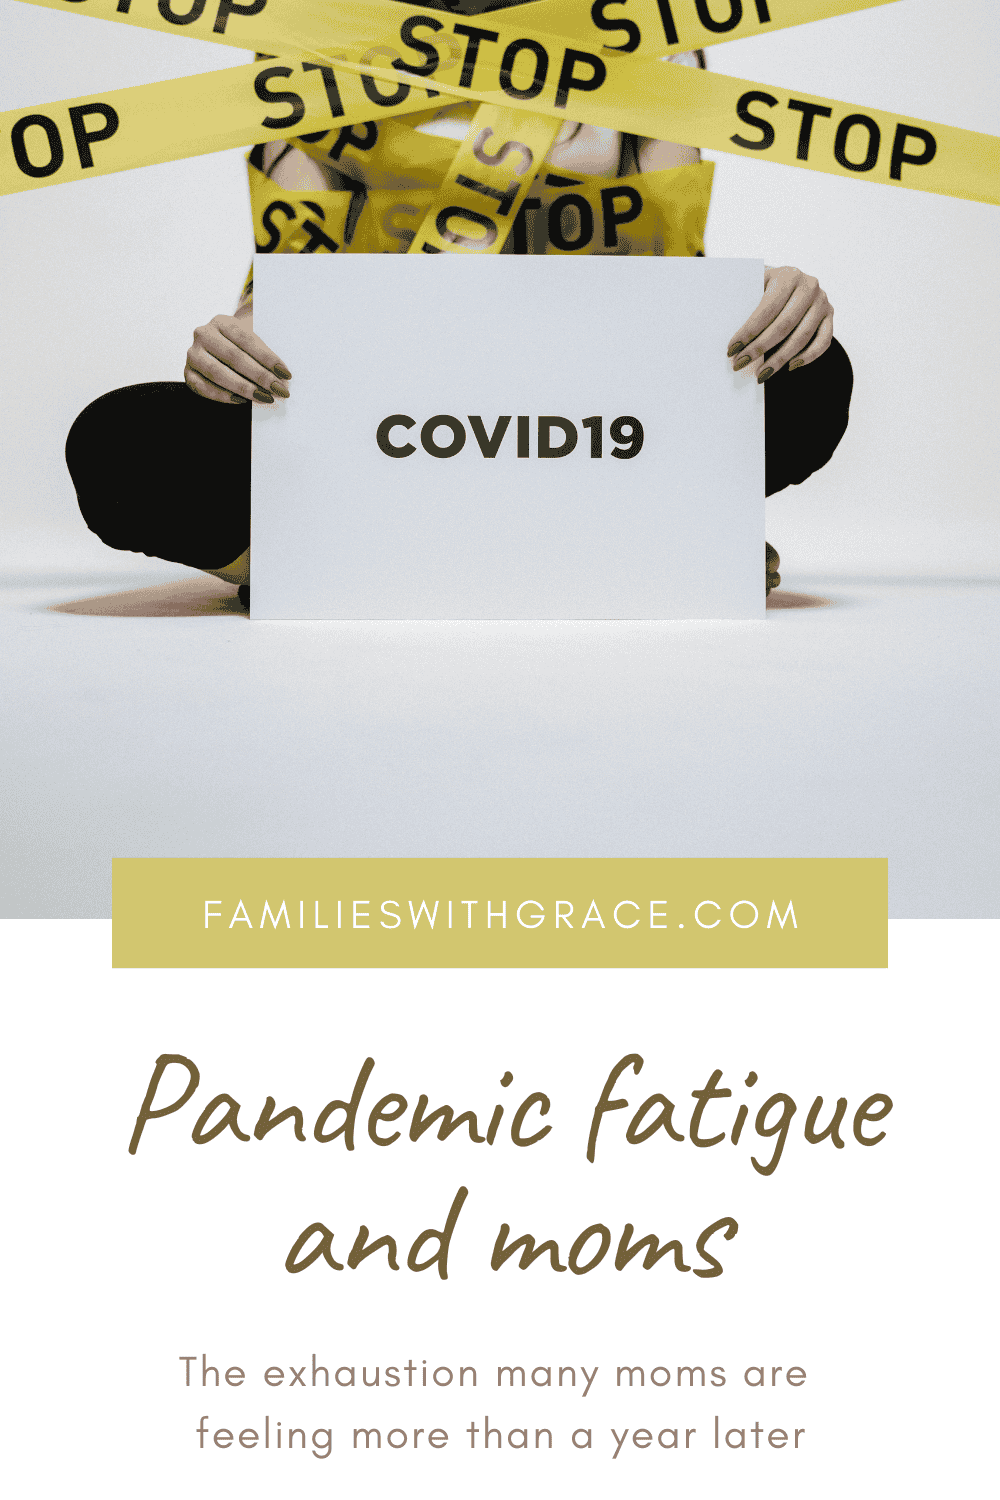 Pandemic fatigue and moms